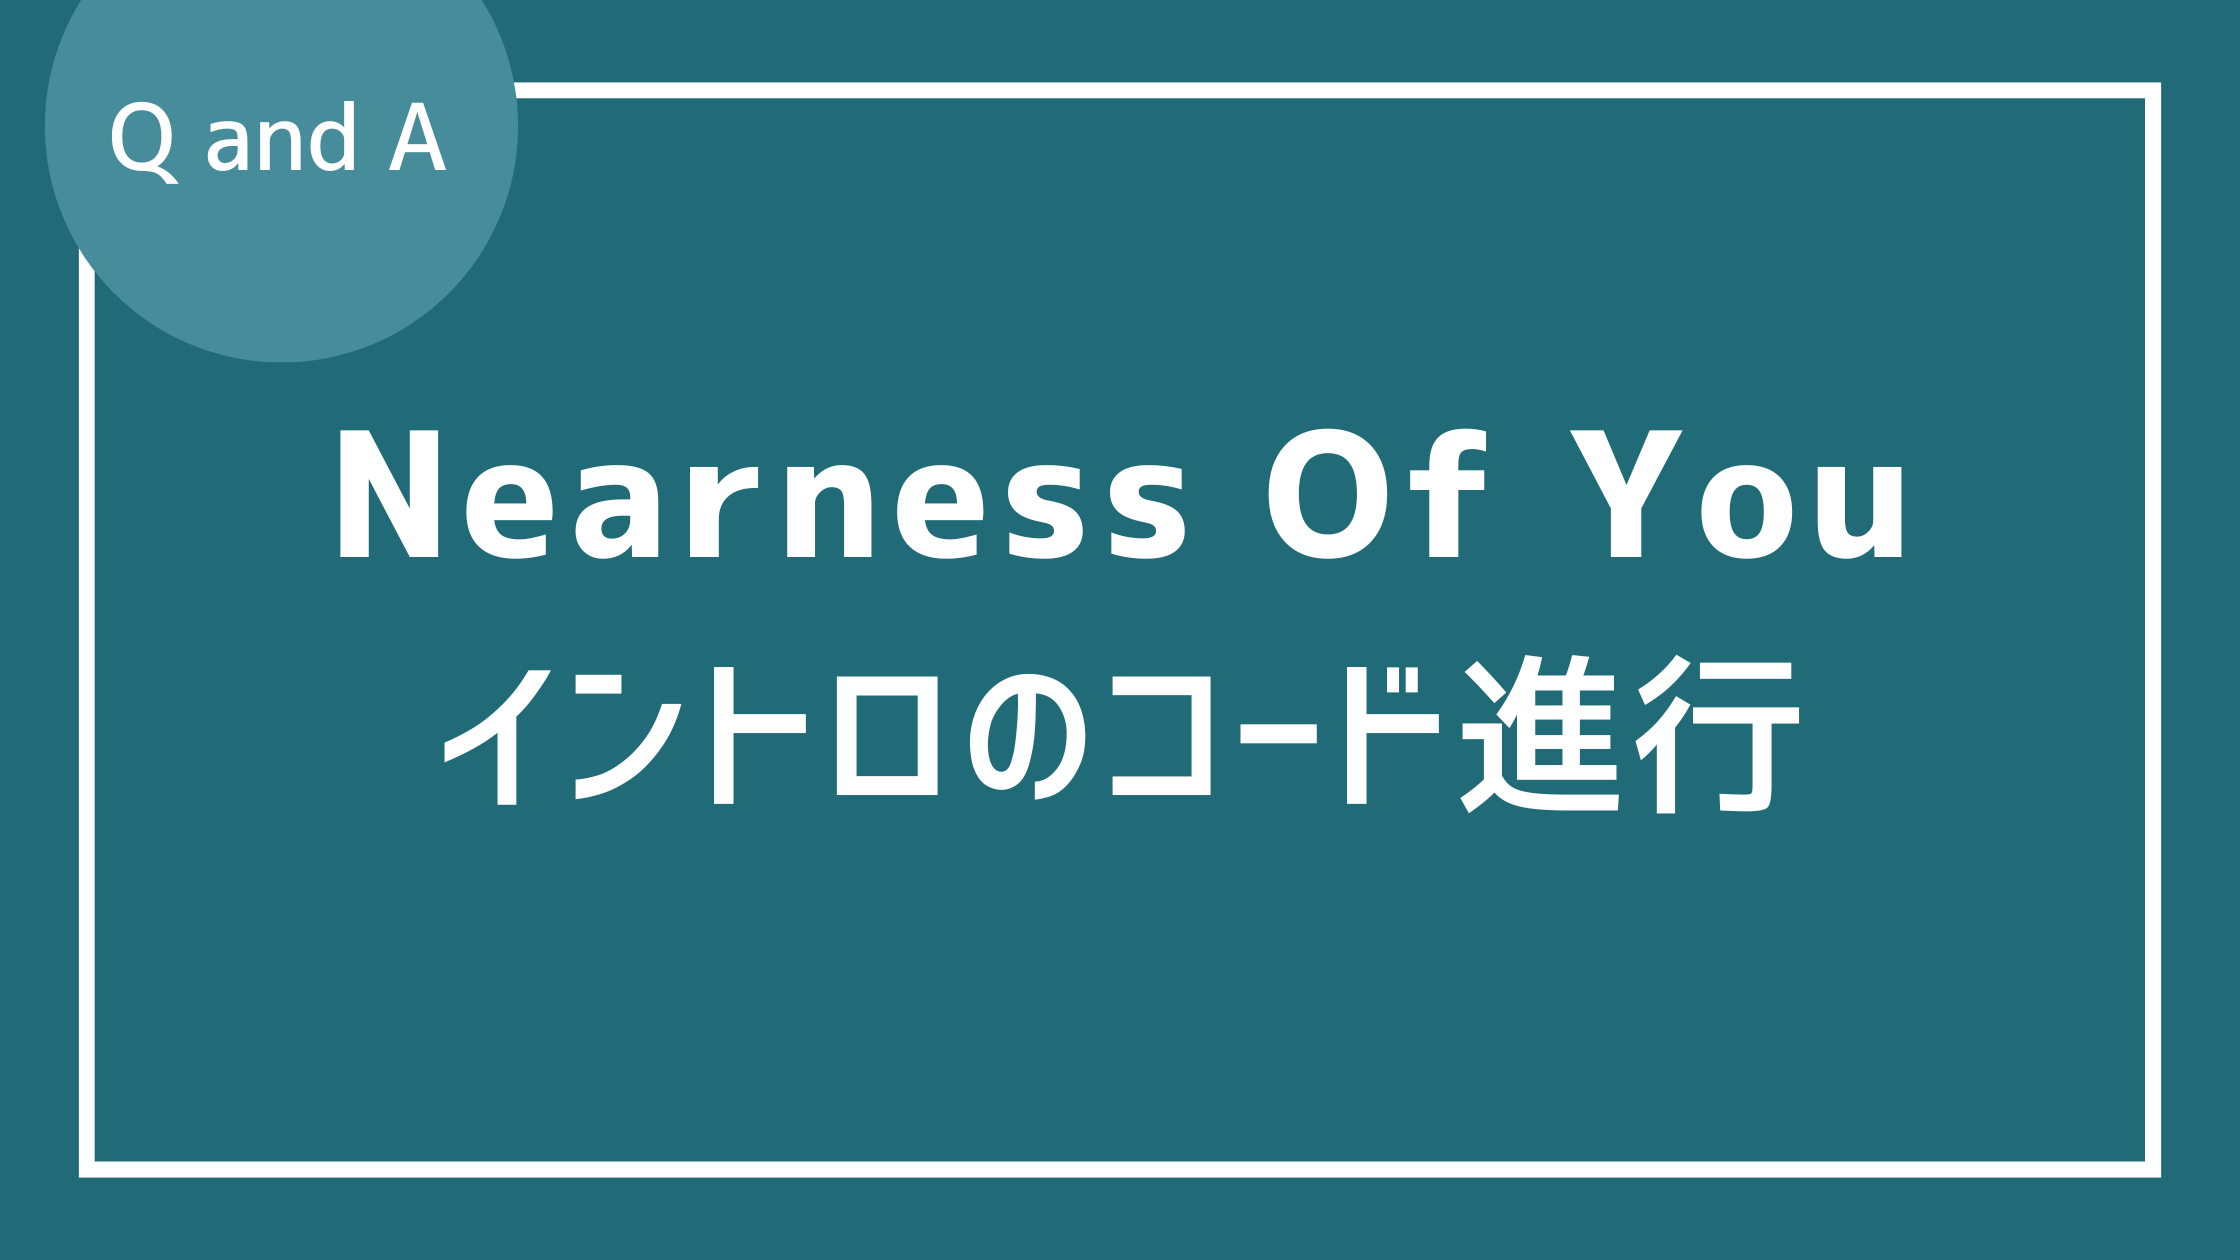 The nearness of youのイントロ